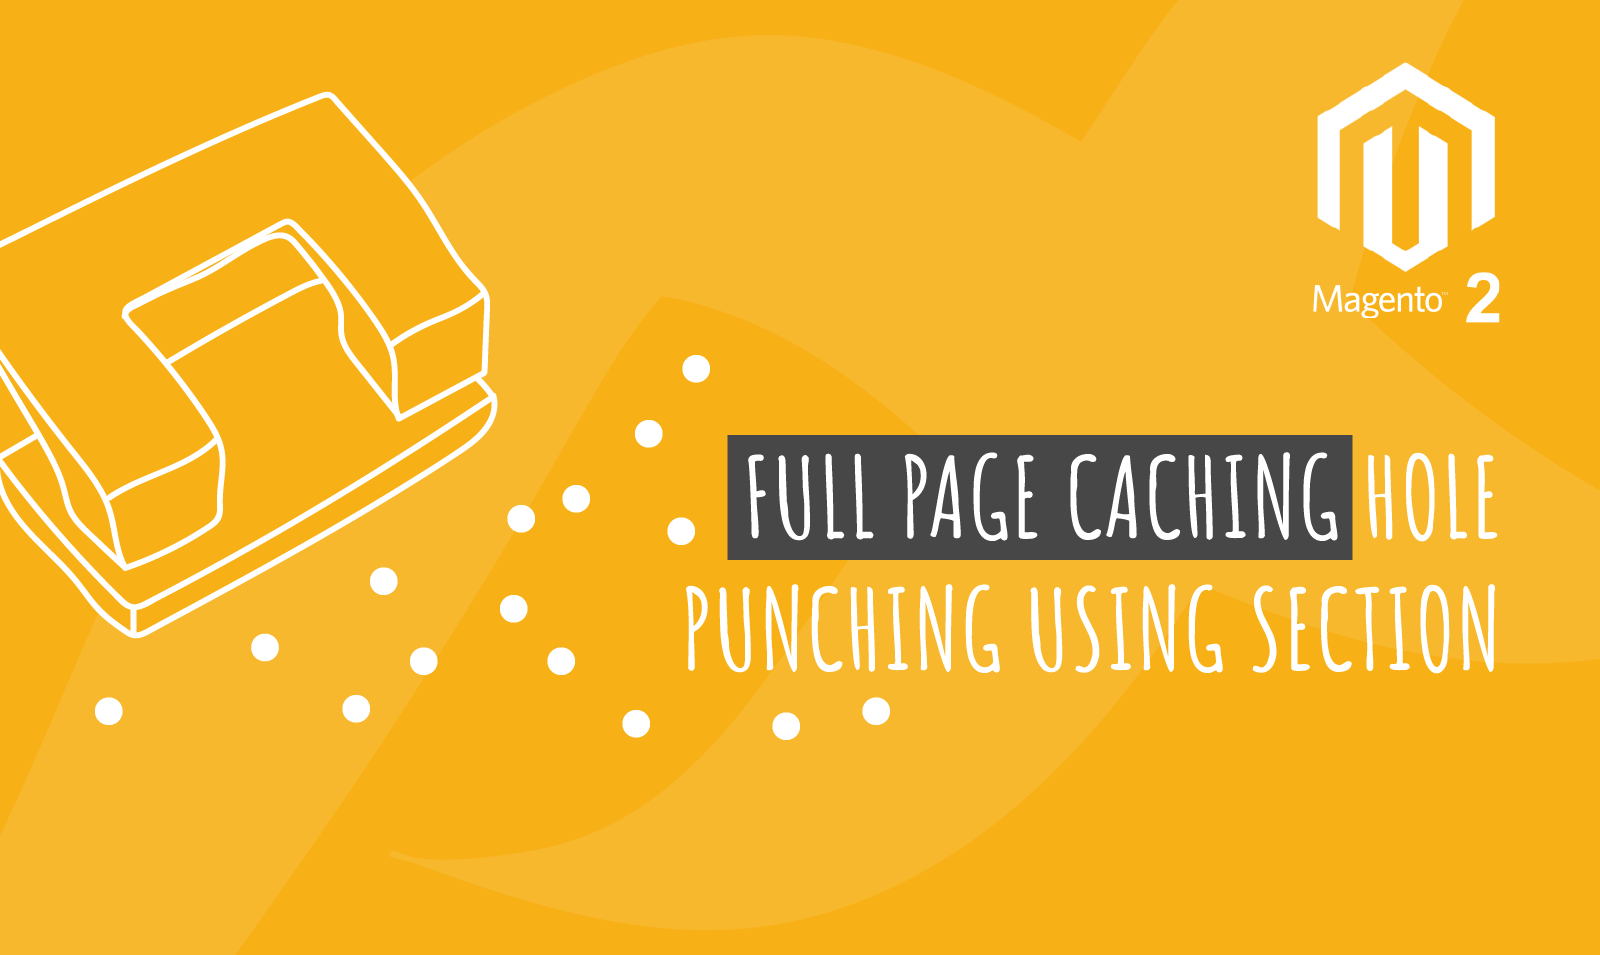 Magento 2 Full Page Caching Hole Punching Using Section